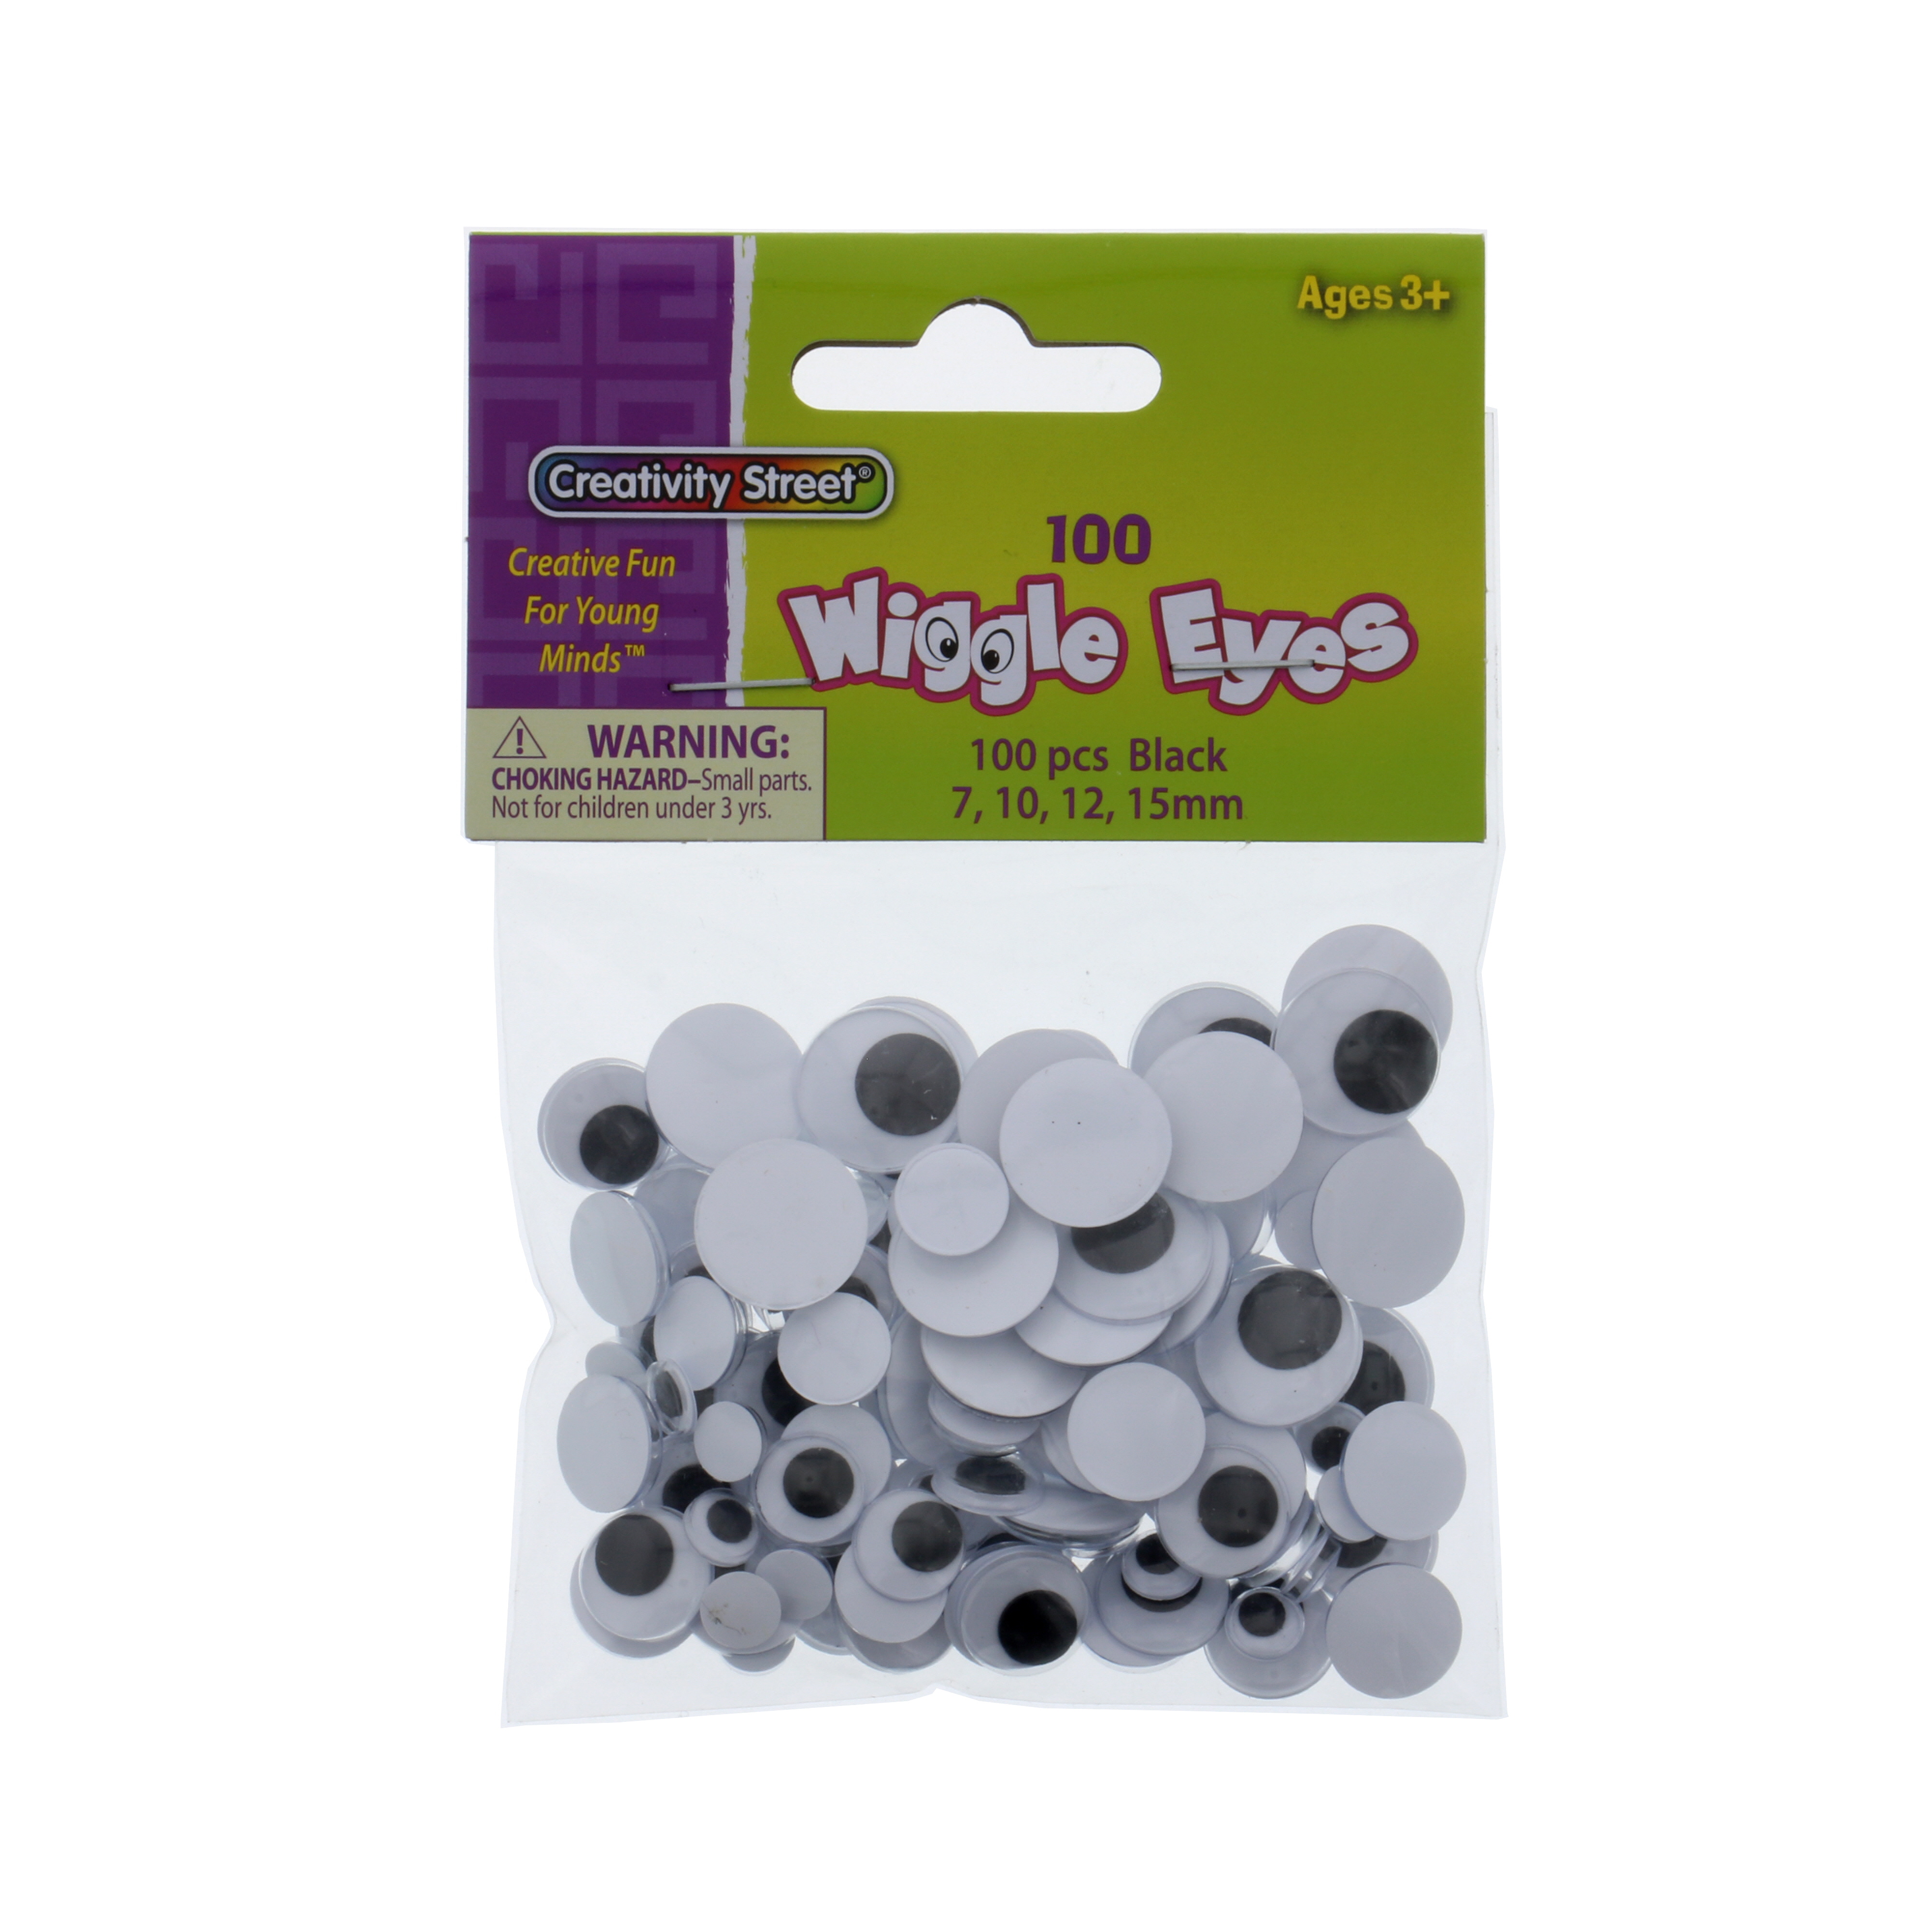 Creativity Street Round Wiggle Eye, Assorted Size, Black on White, Pack of 100 - image 1 of 5